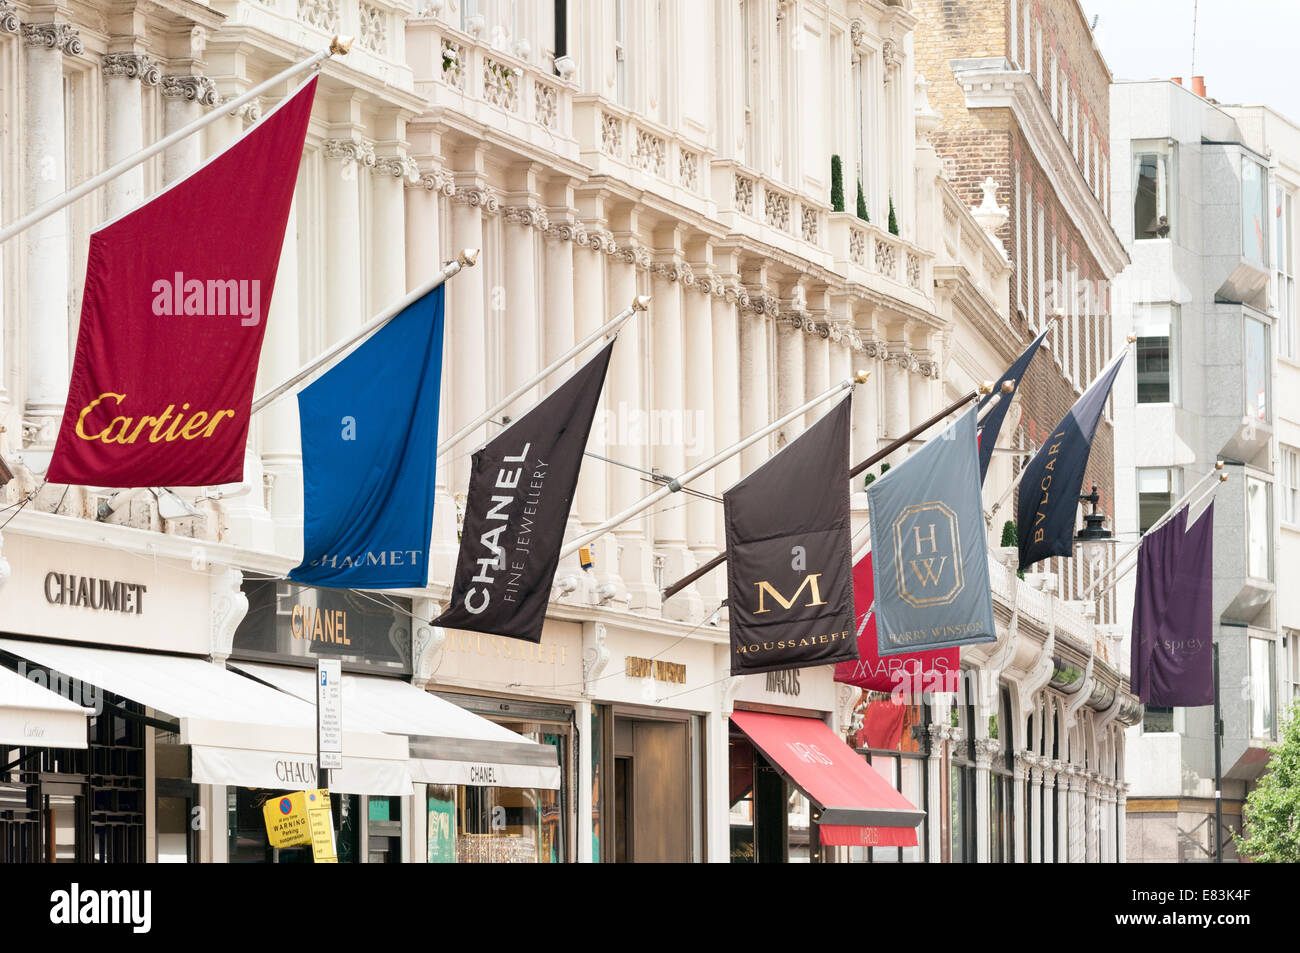 Expensive shop signs in New Bond Street, London, England, UK Stock Photo